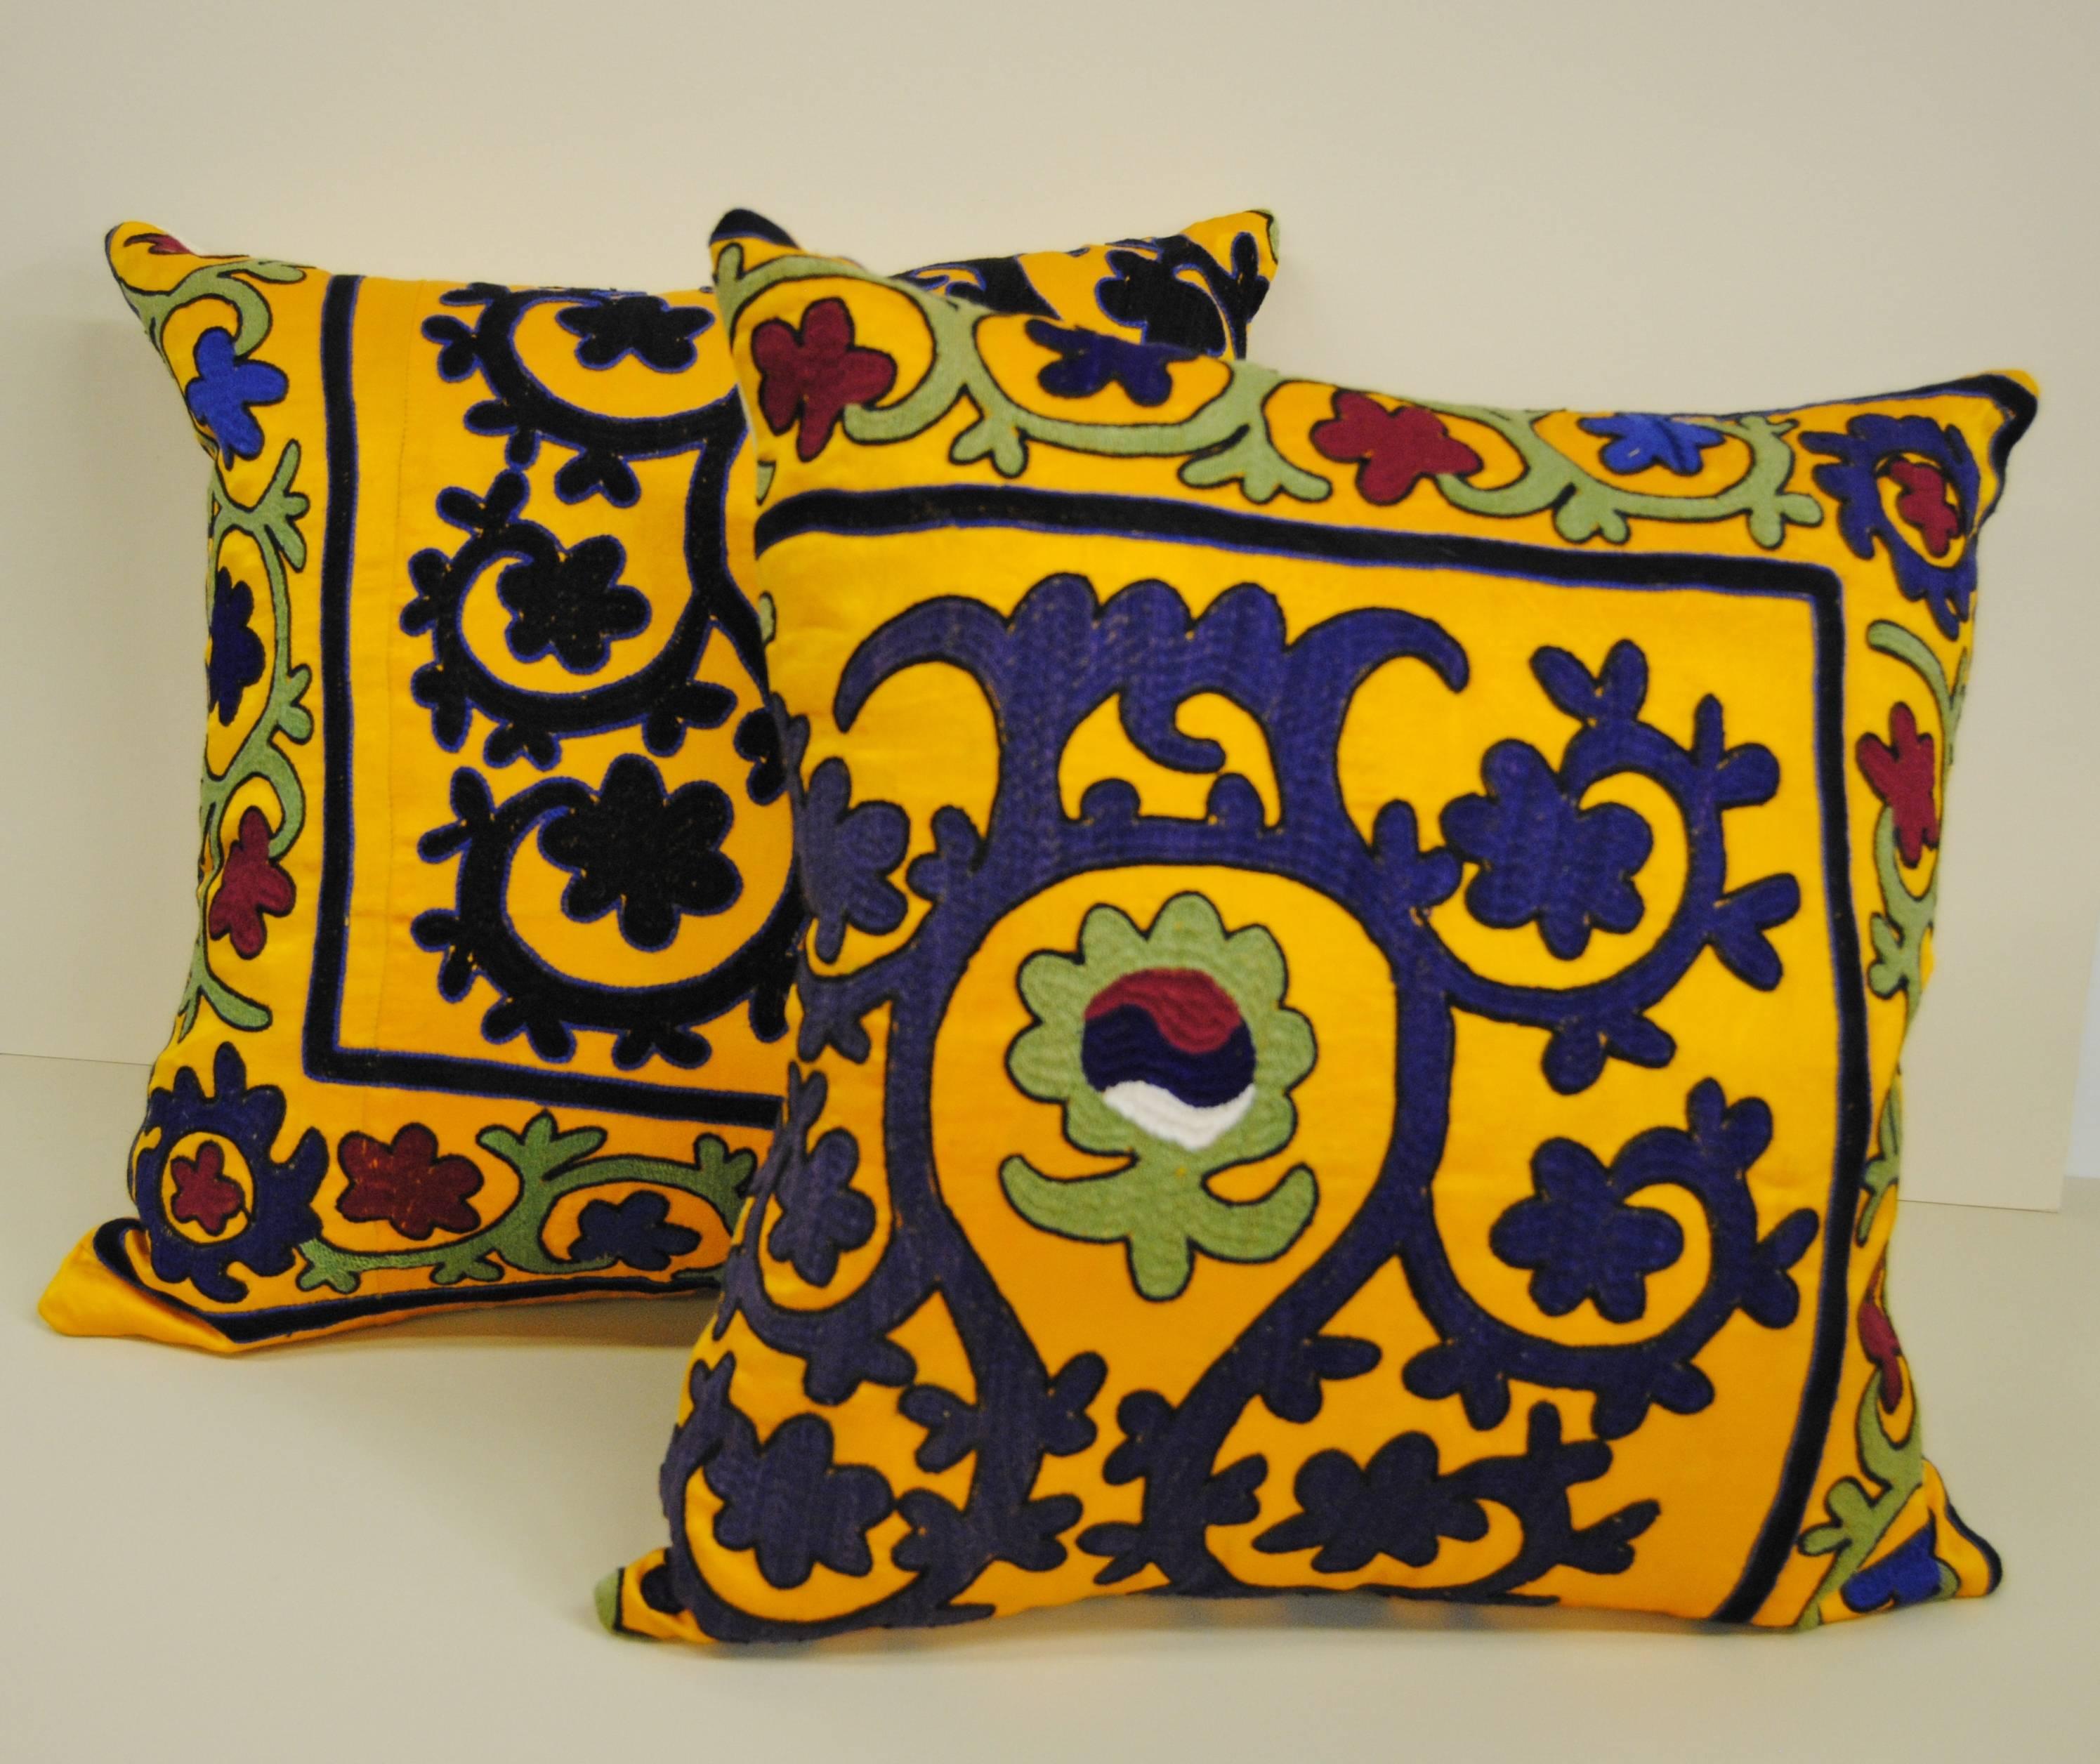 20th Century Hand Embroidered Silk or Cotton Uzbekistan Textile Pillow For Sale